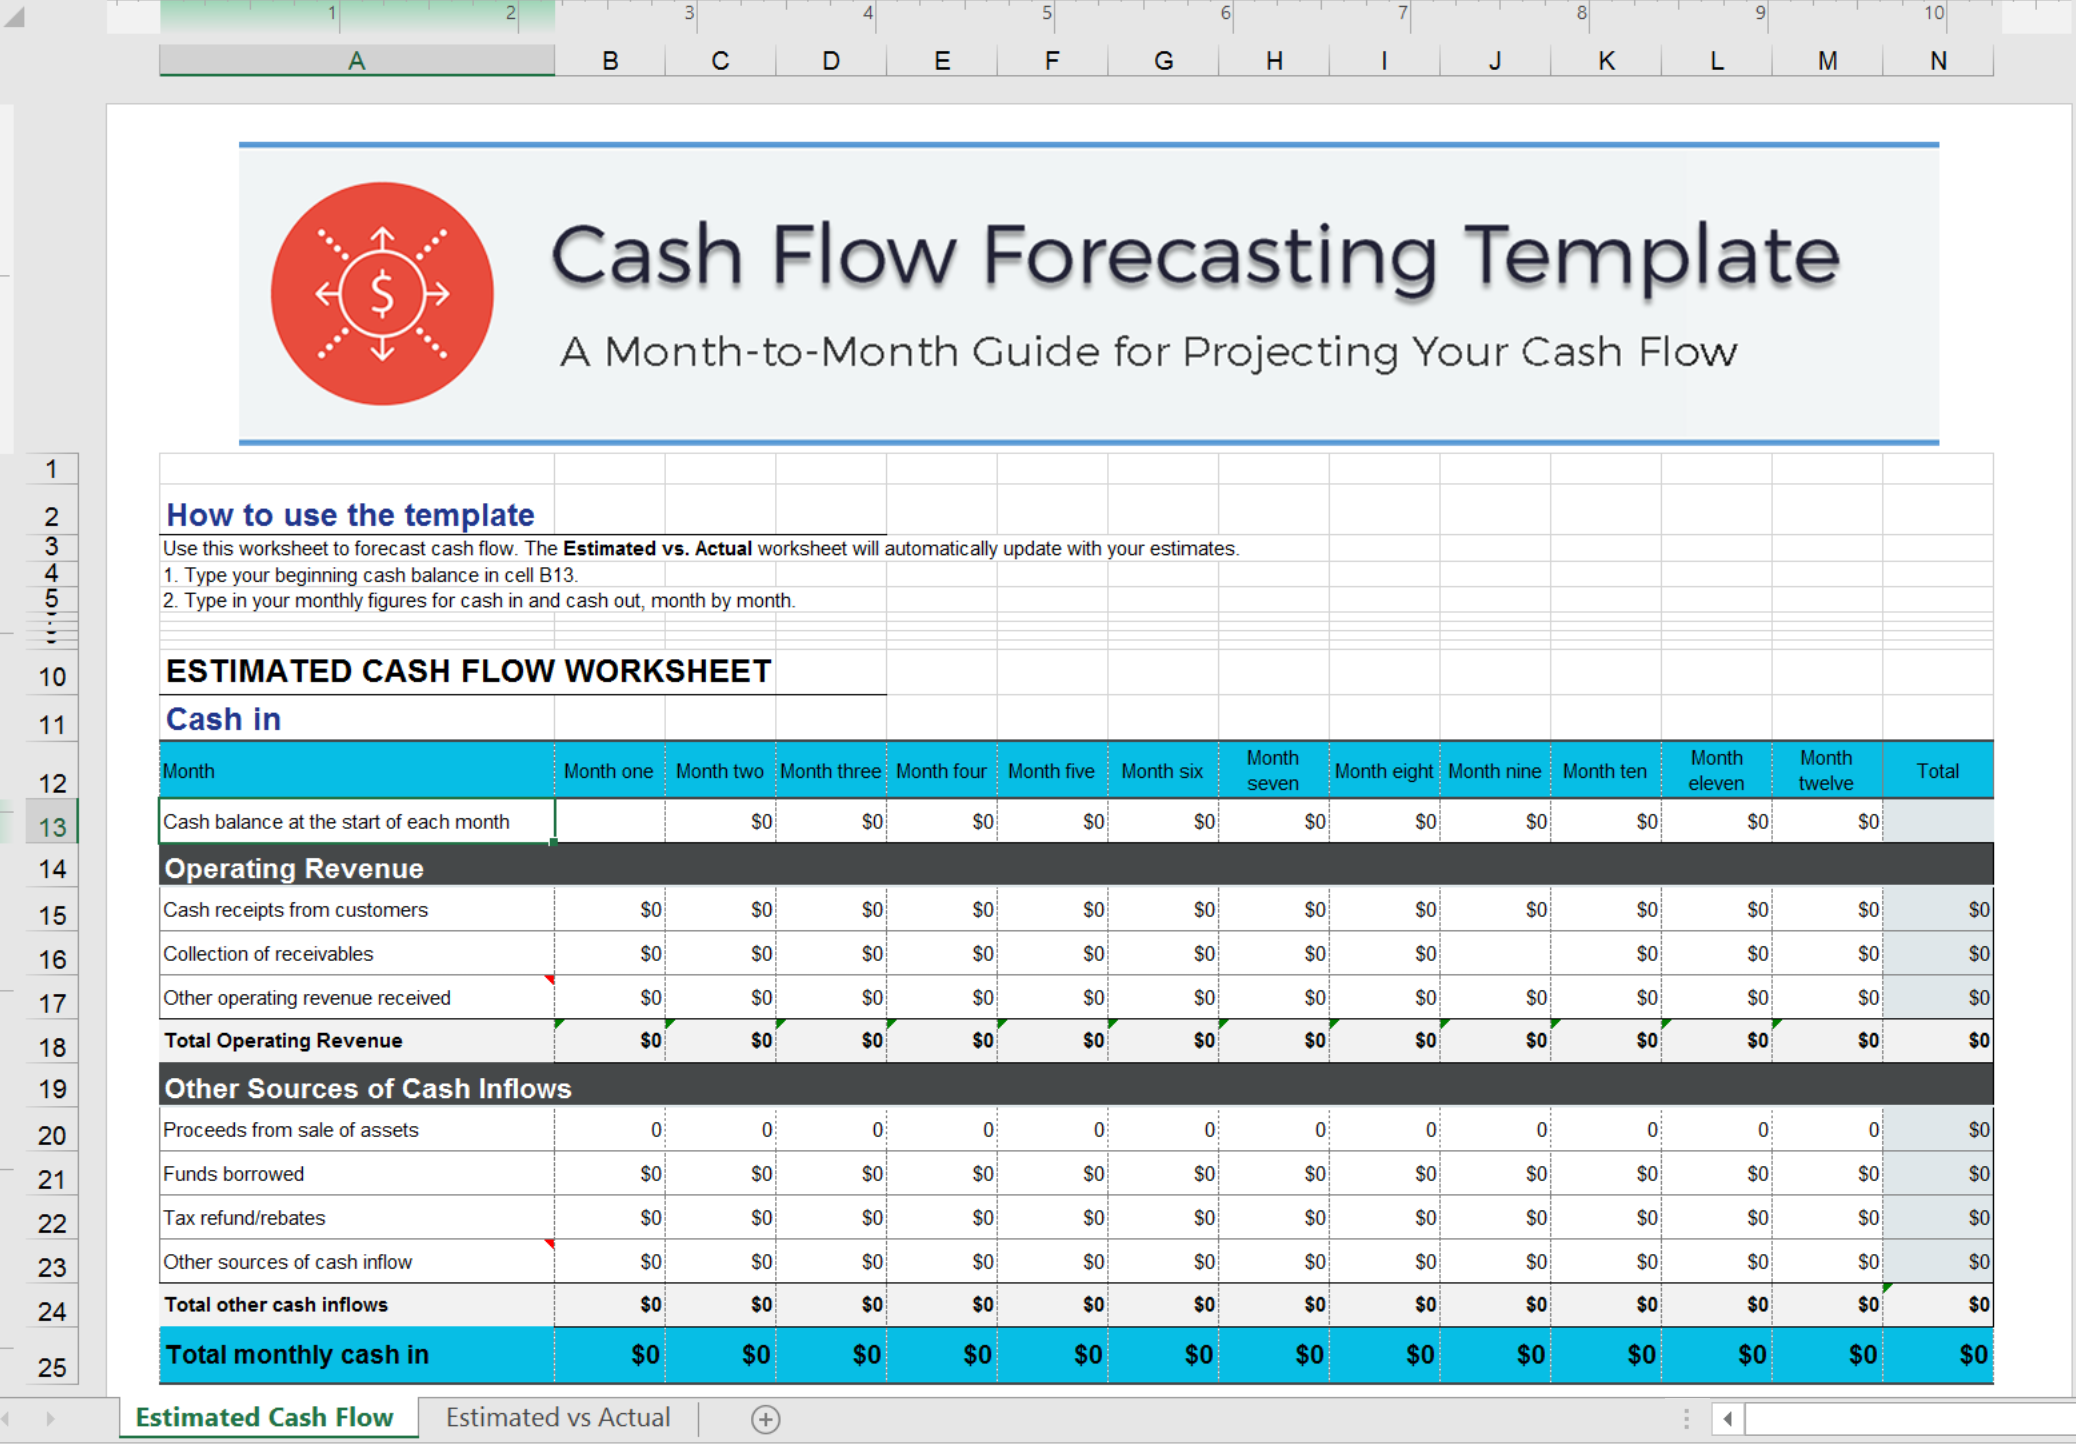 your business plan calls for the following monthly cash flows